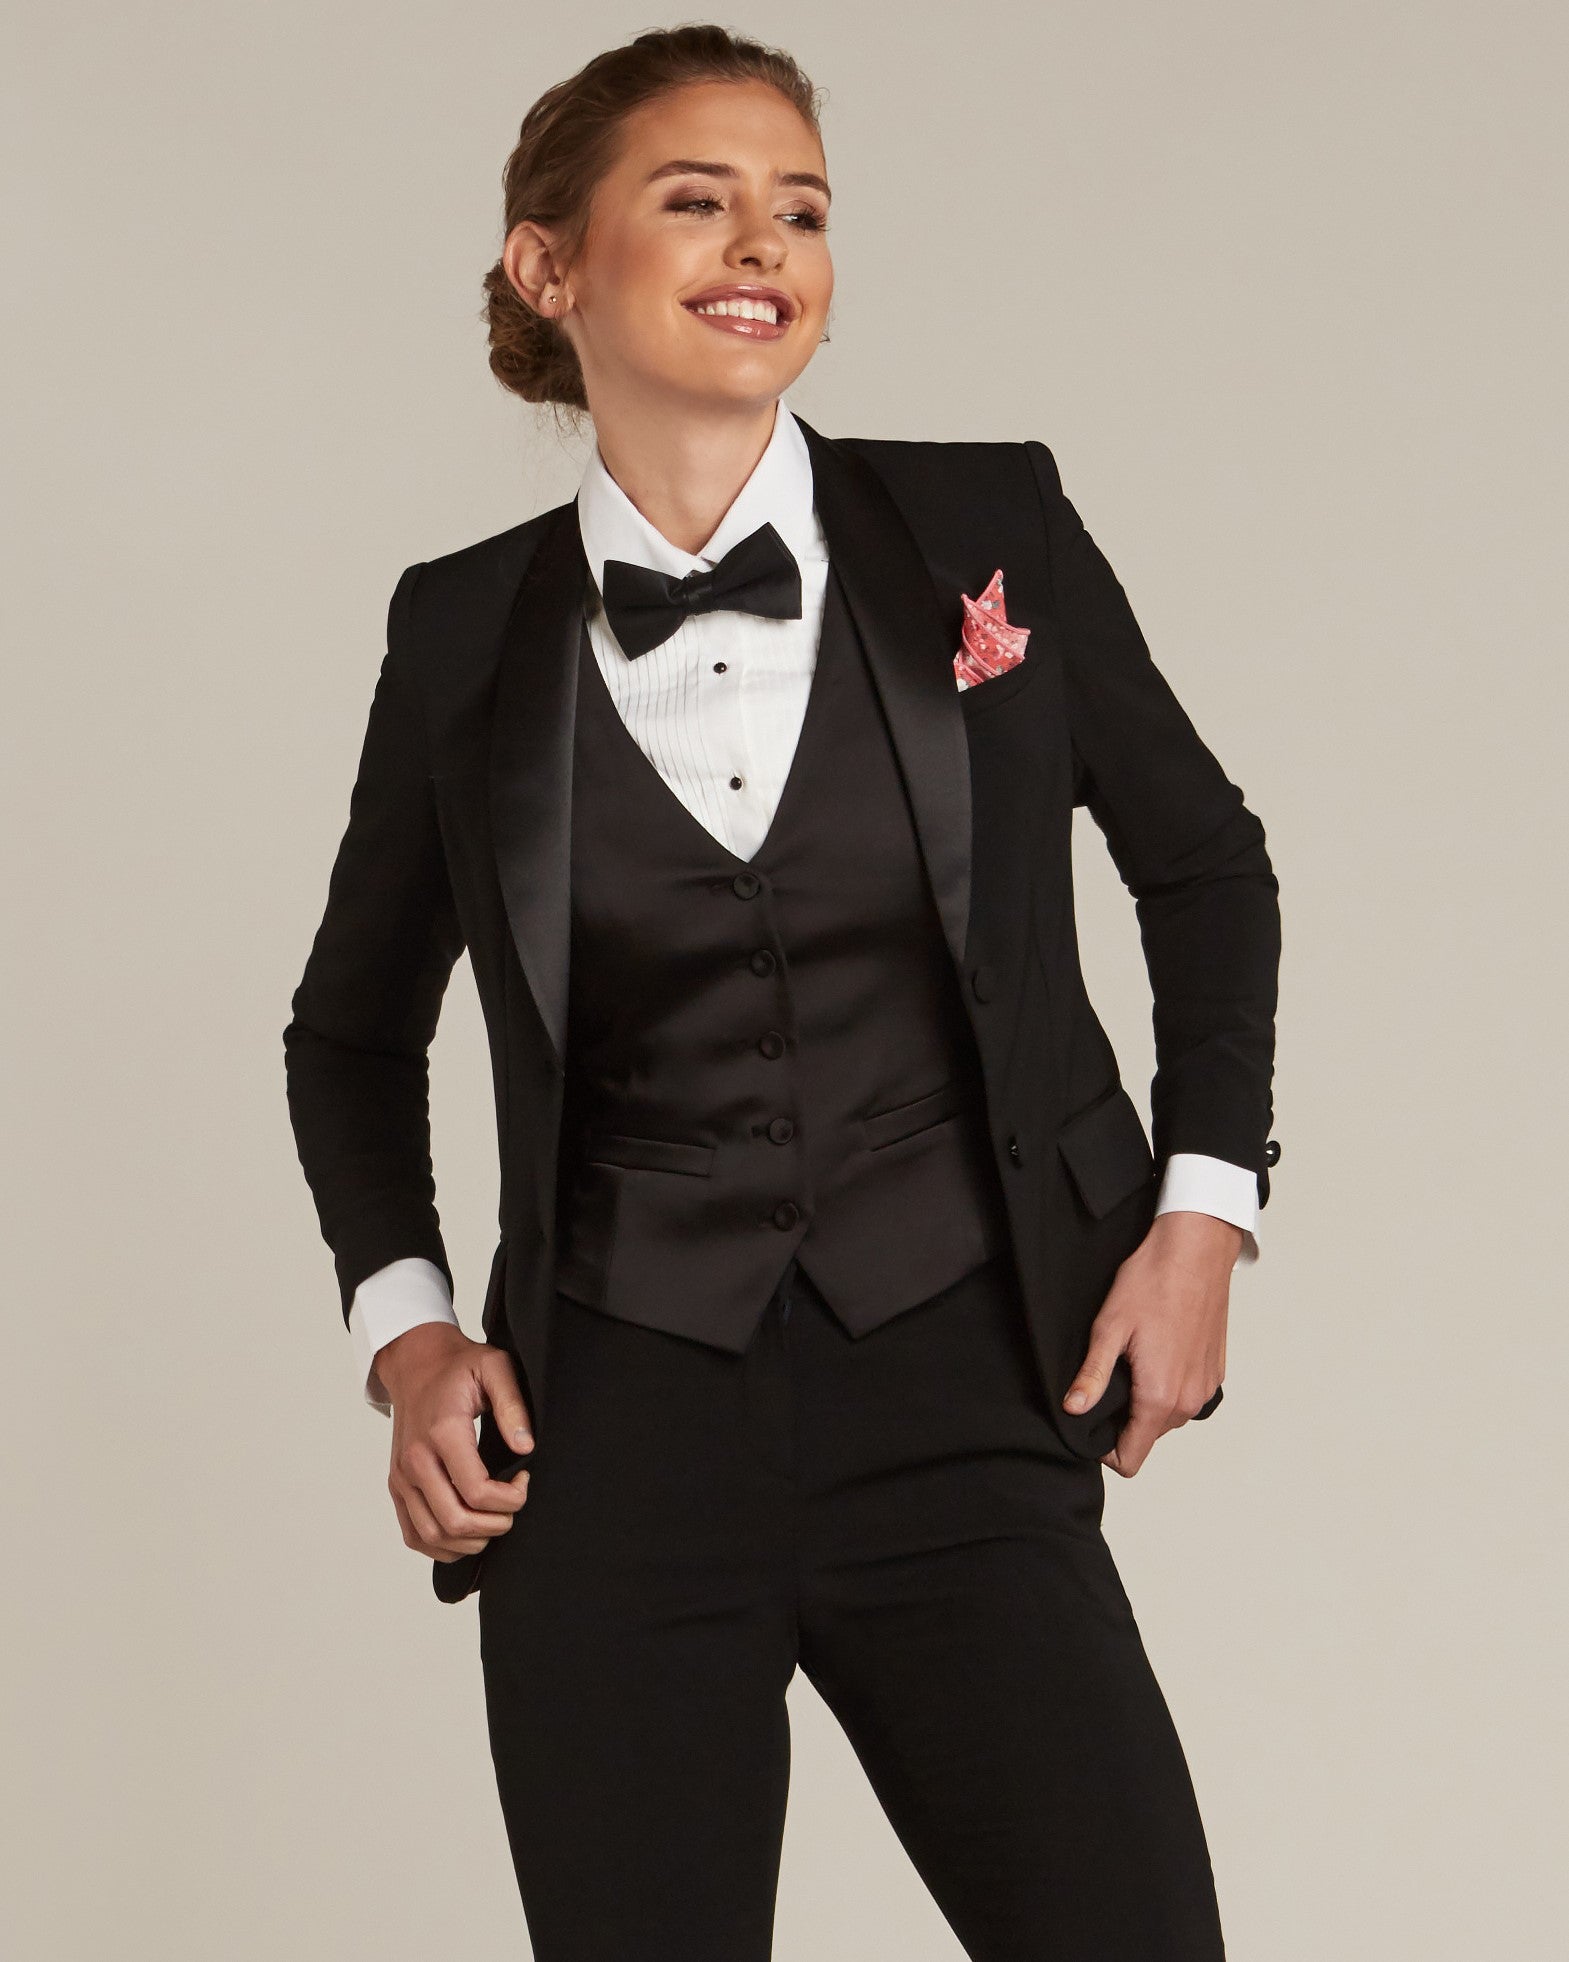 Suits & Tuxedos for Men and Women